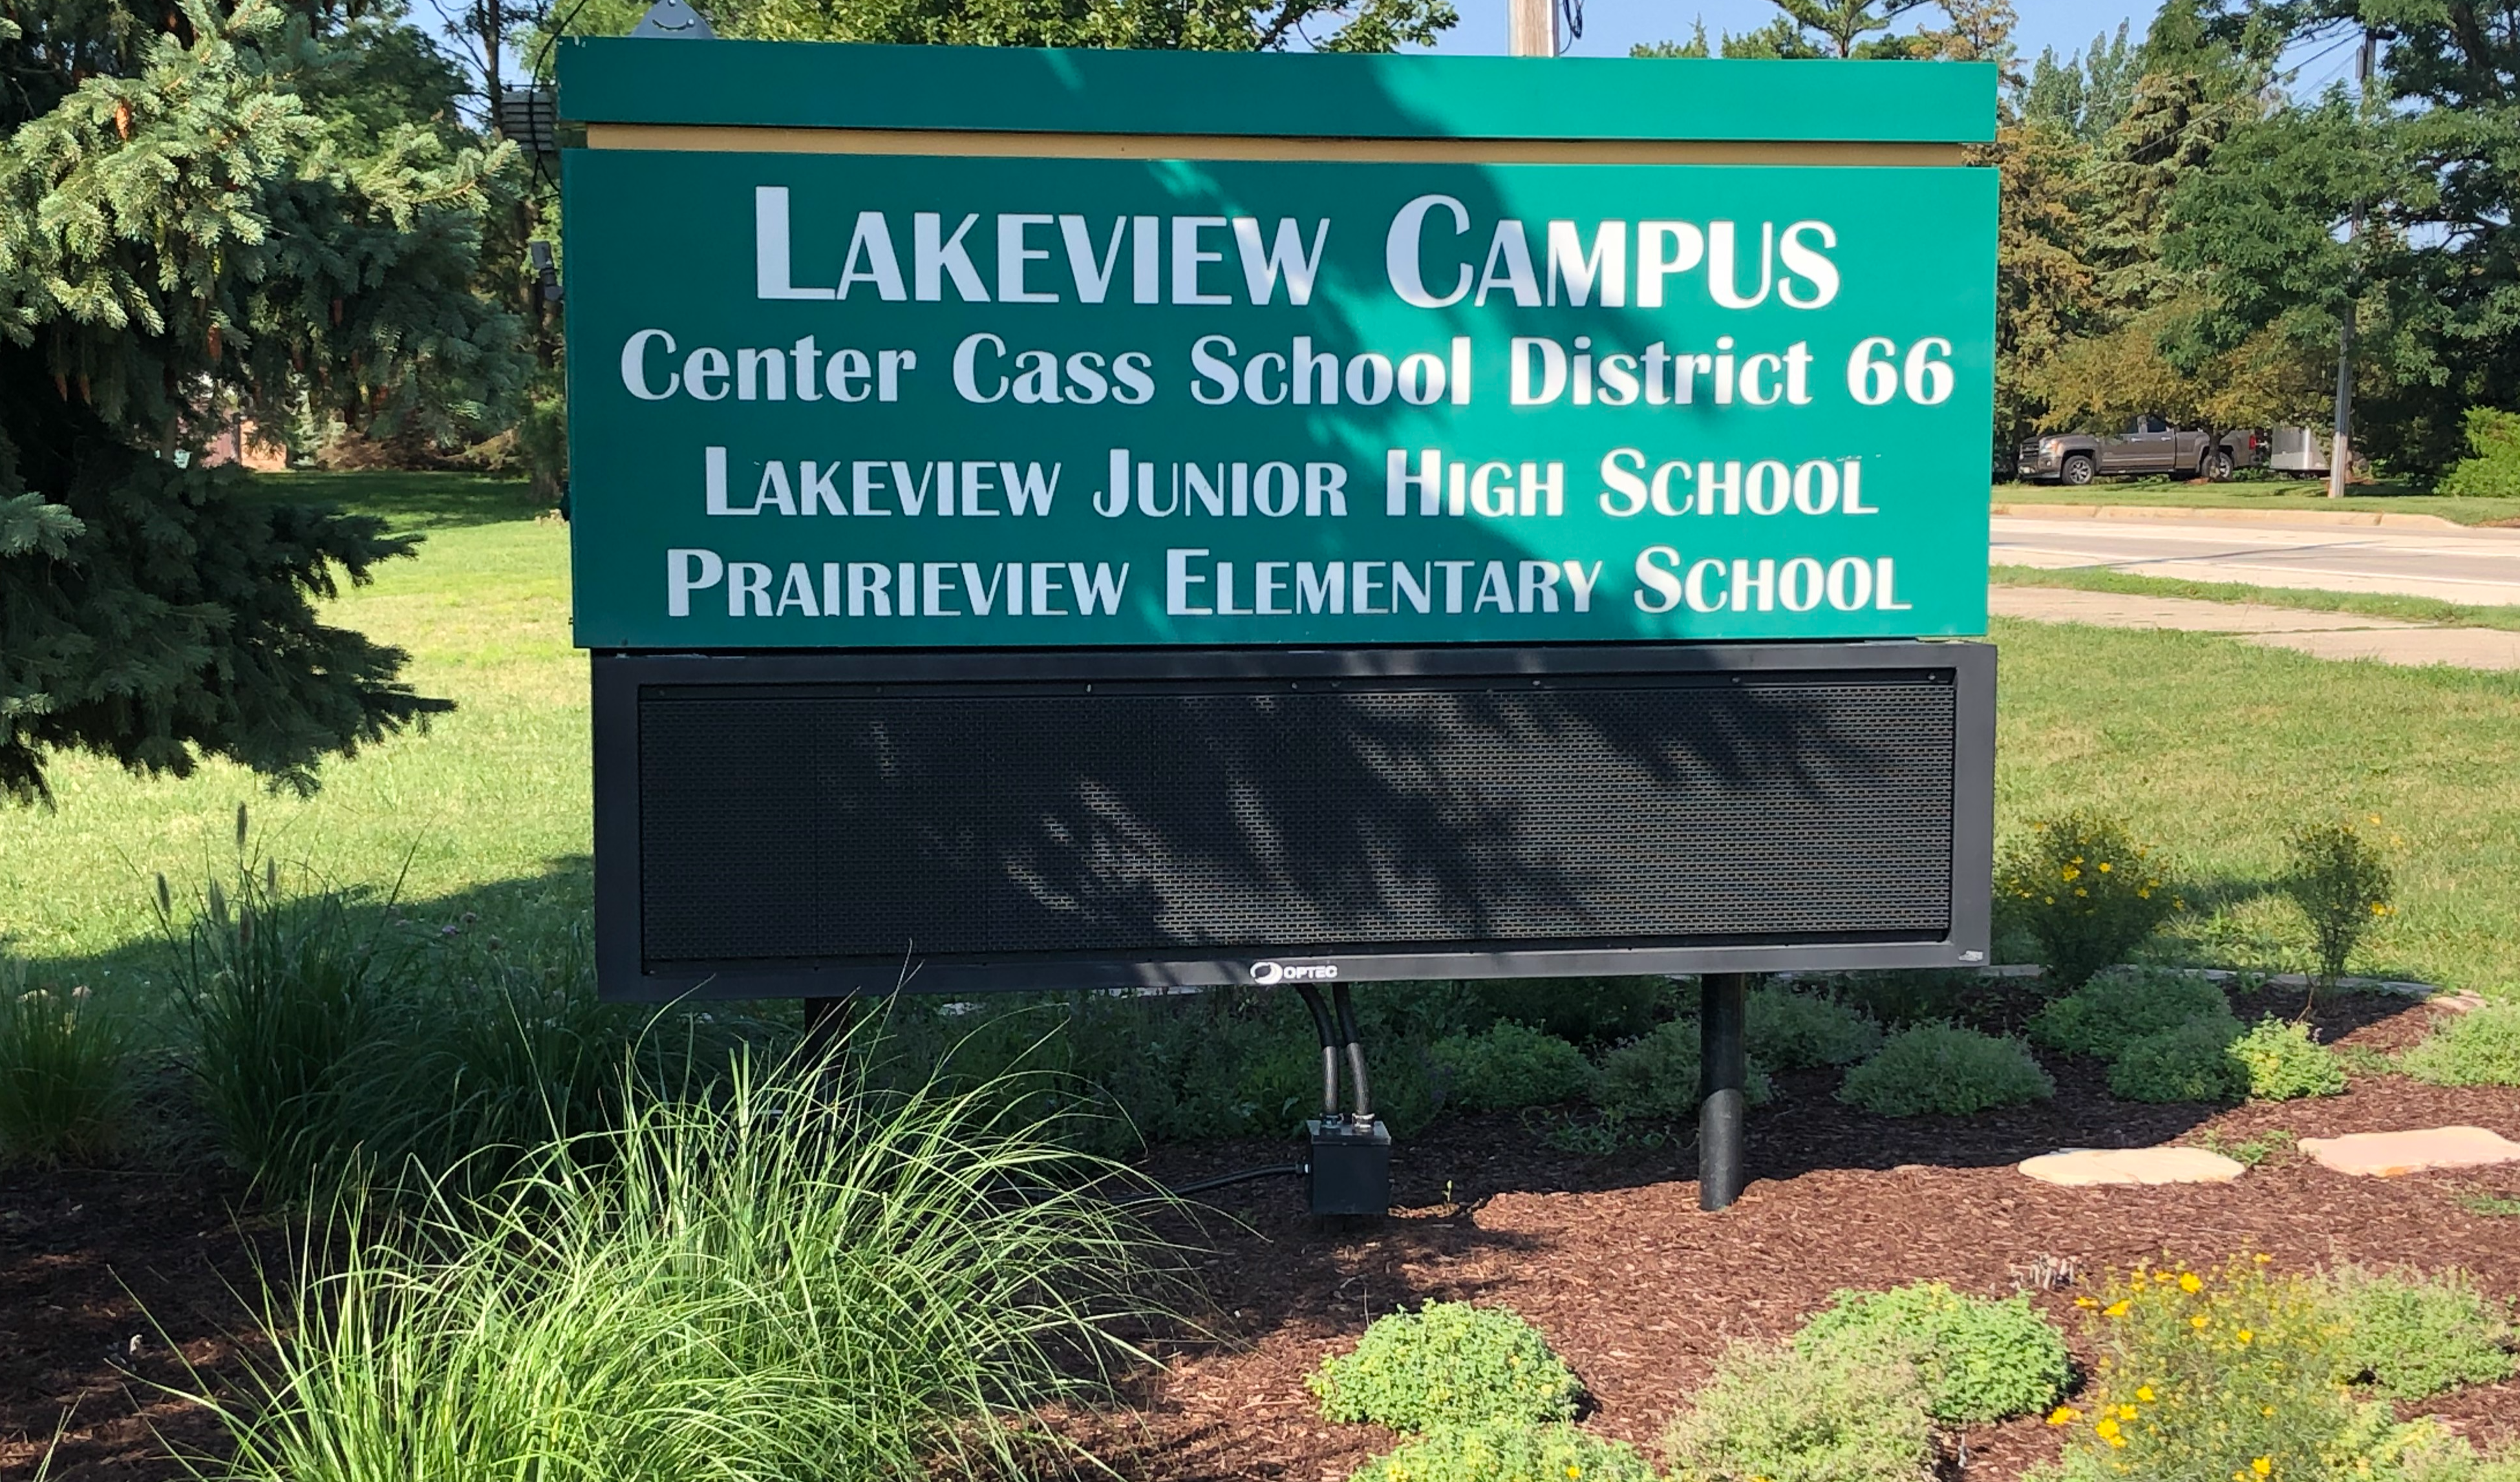 Lakeview campus Center Cass School District 66 Junior High and Prairieview Elementary sign